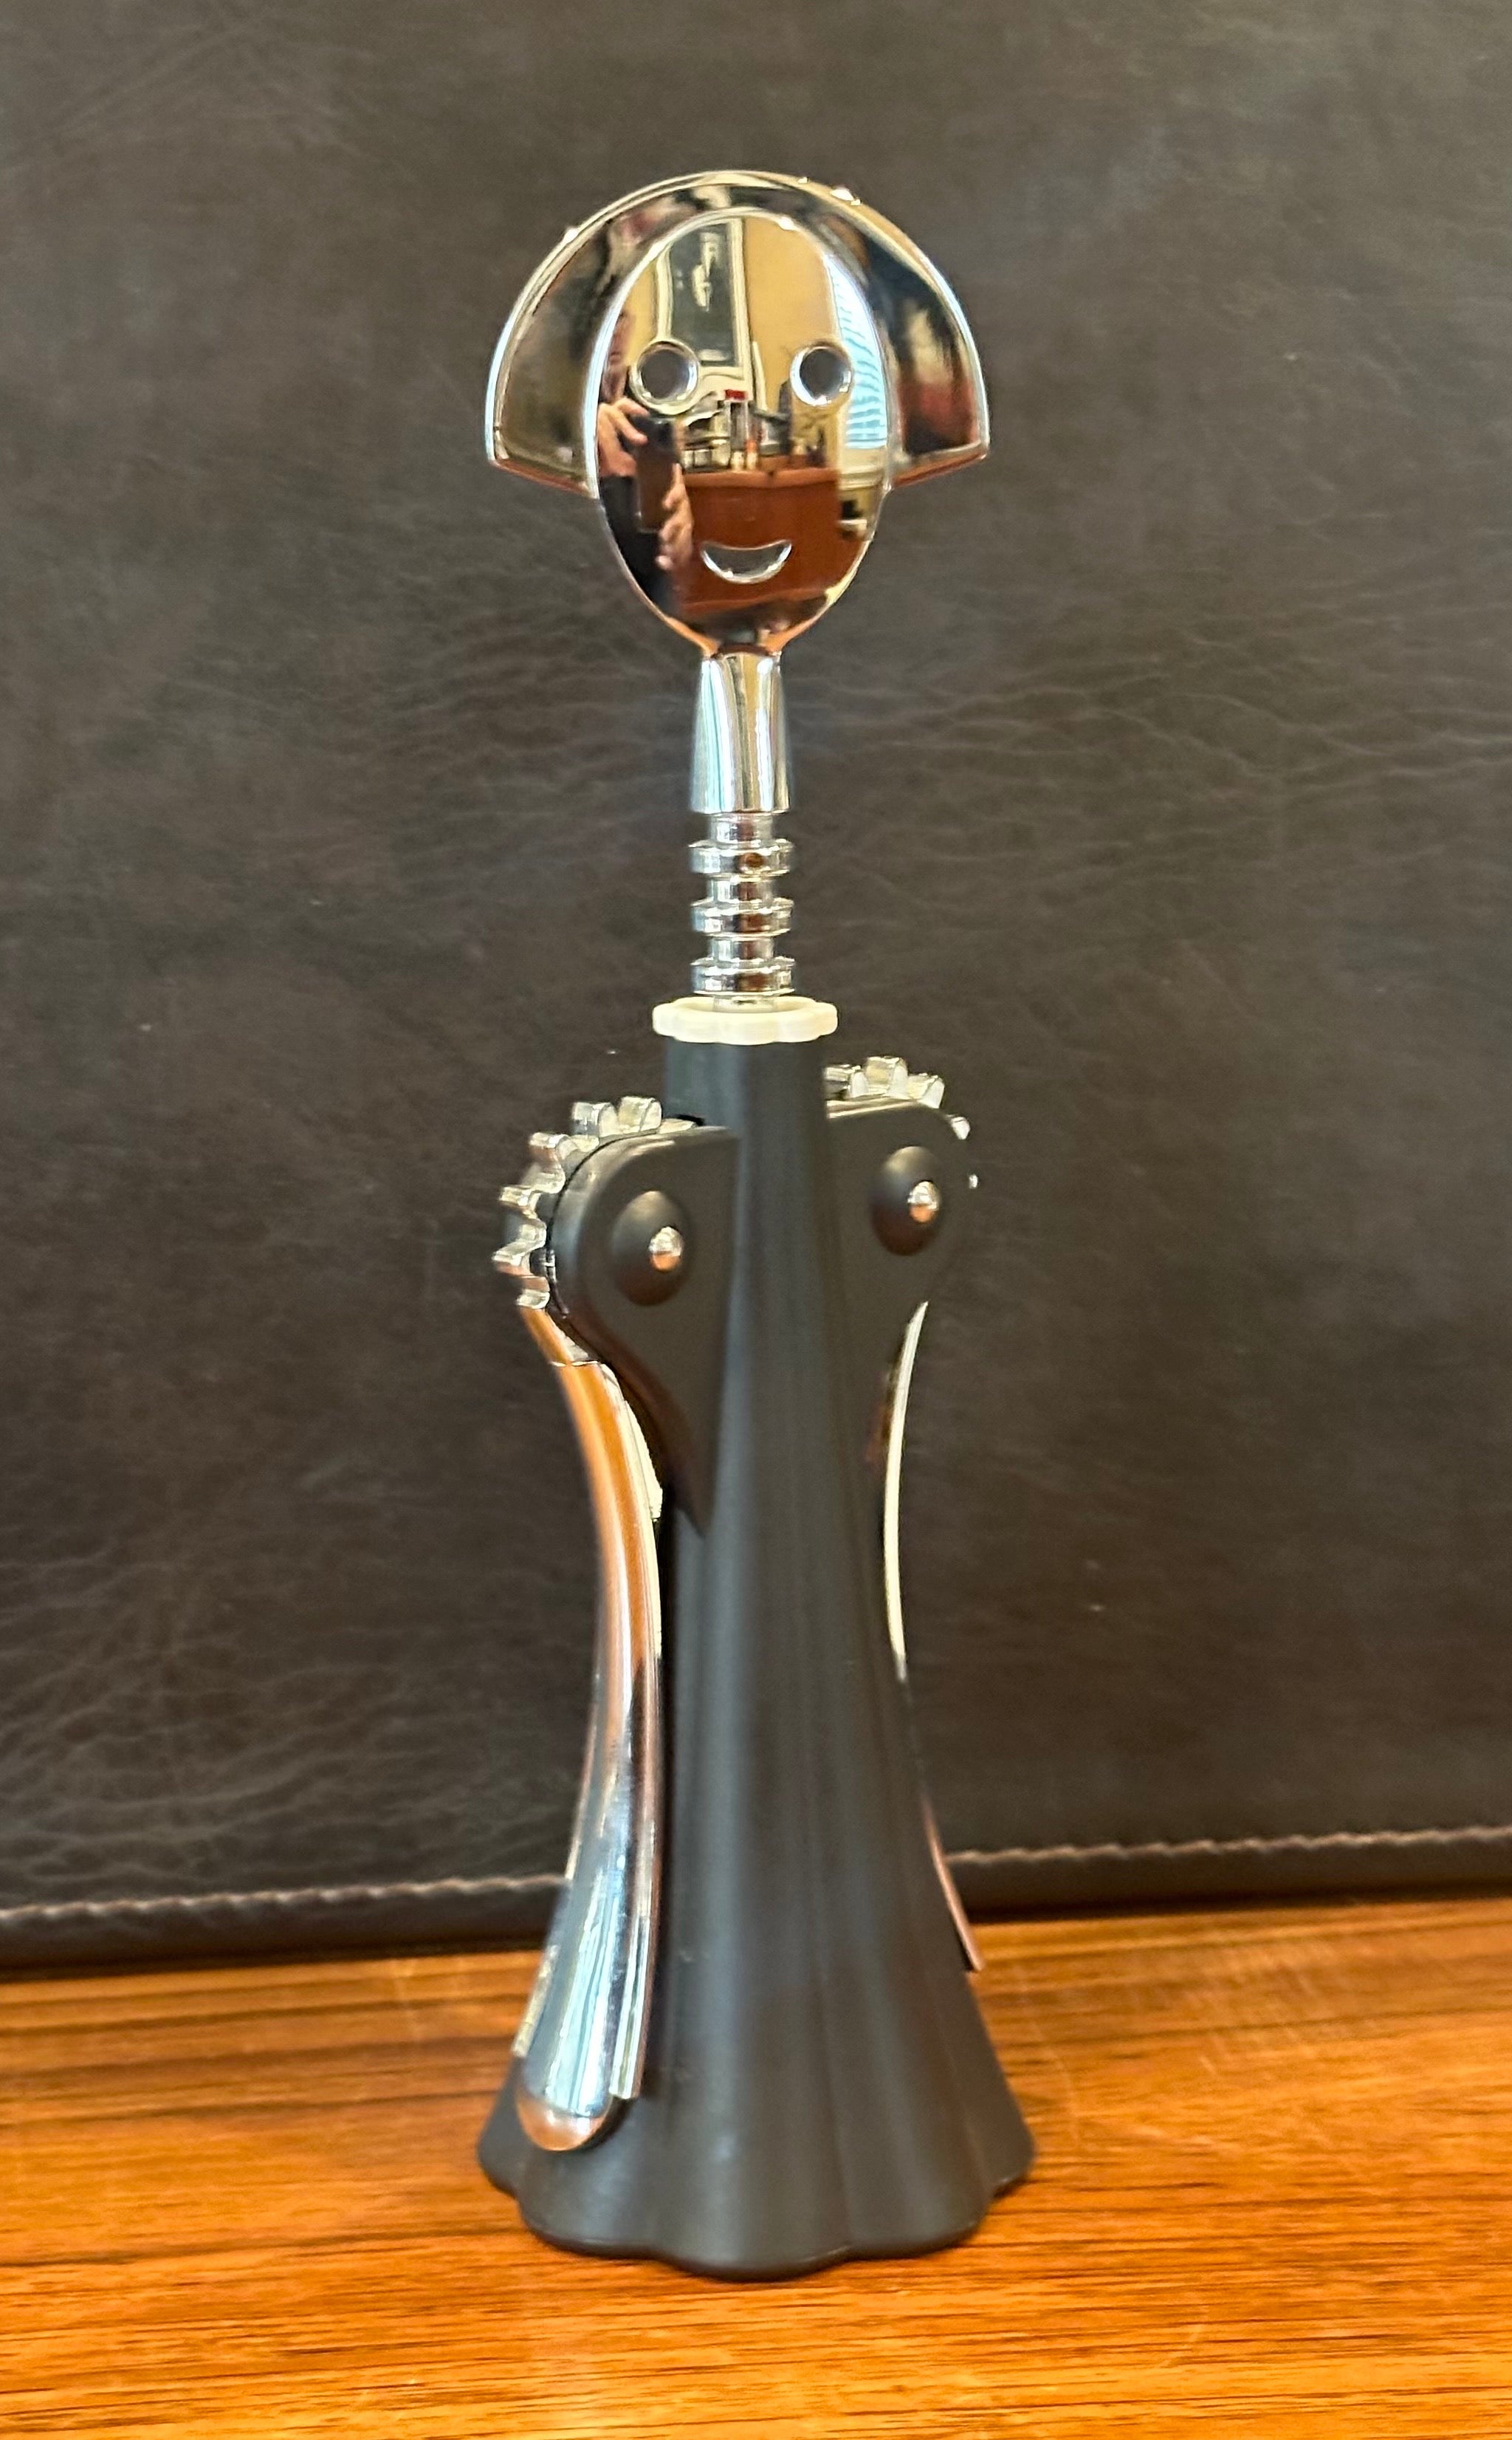  Classic post-modern wine opener by Alessandro Mendini for Alessi, circa 2000s. The piece is in very good condition and measures 3